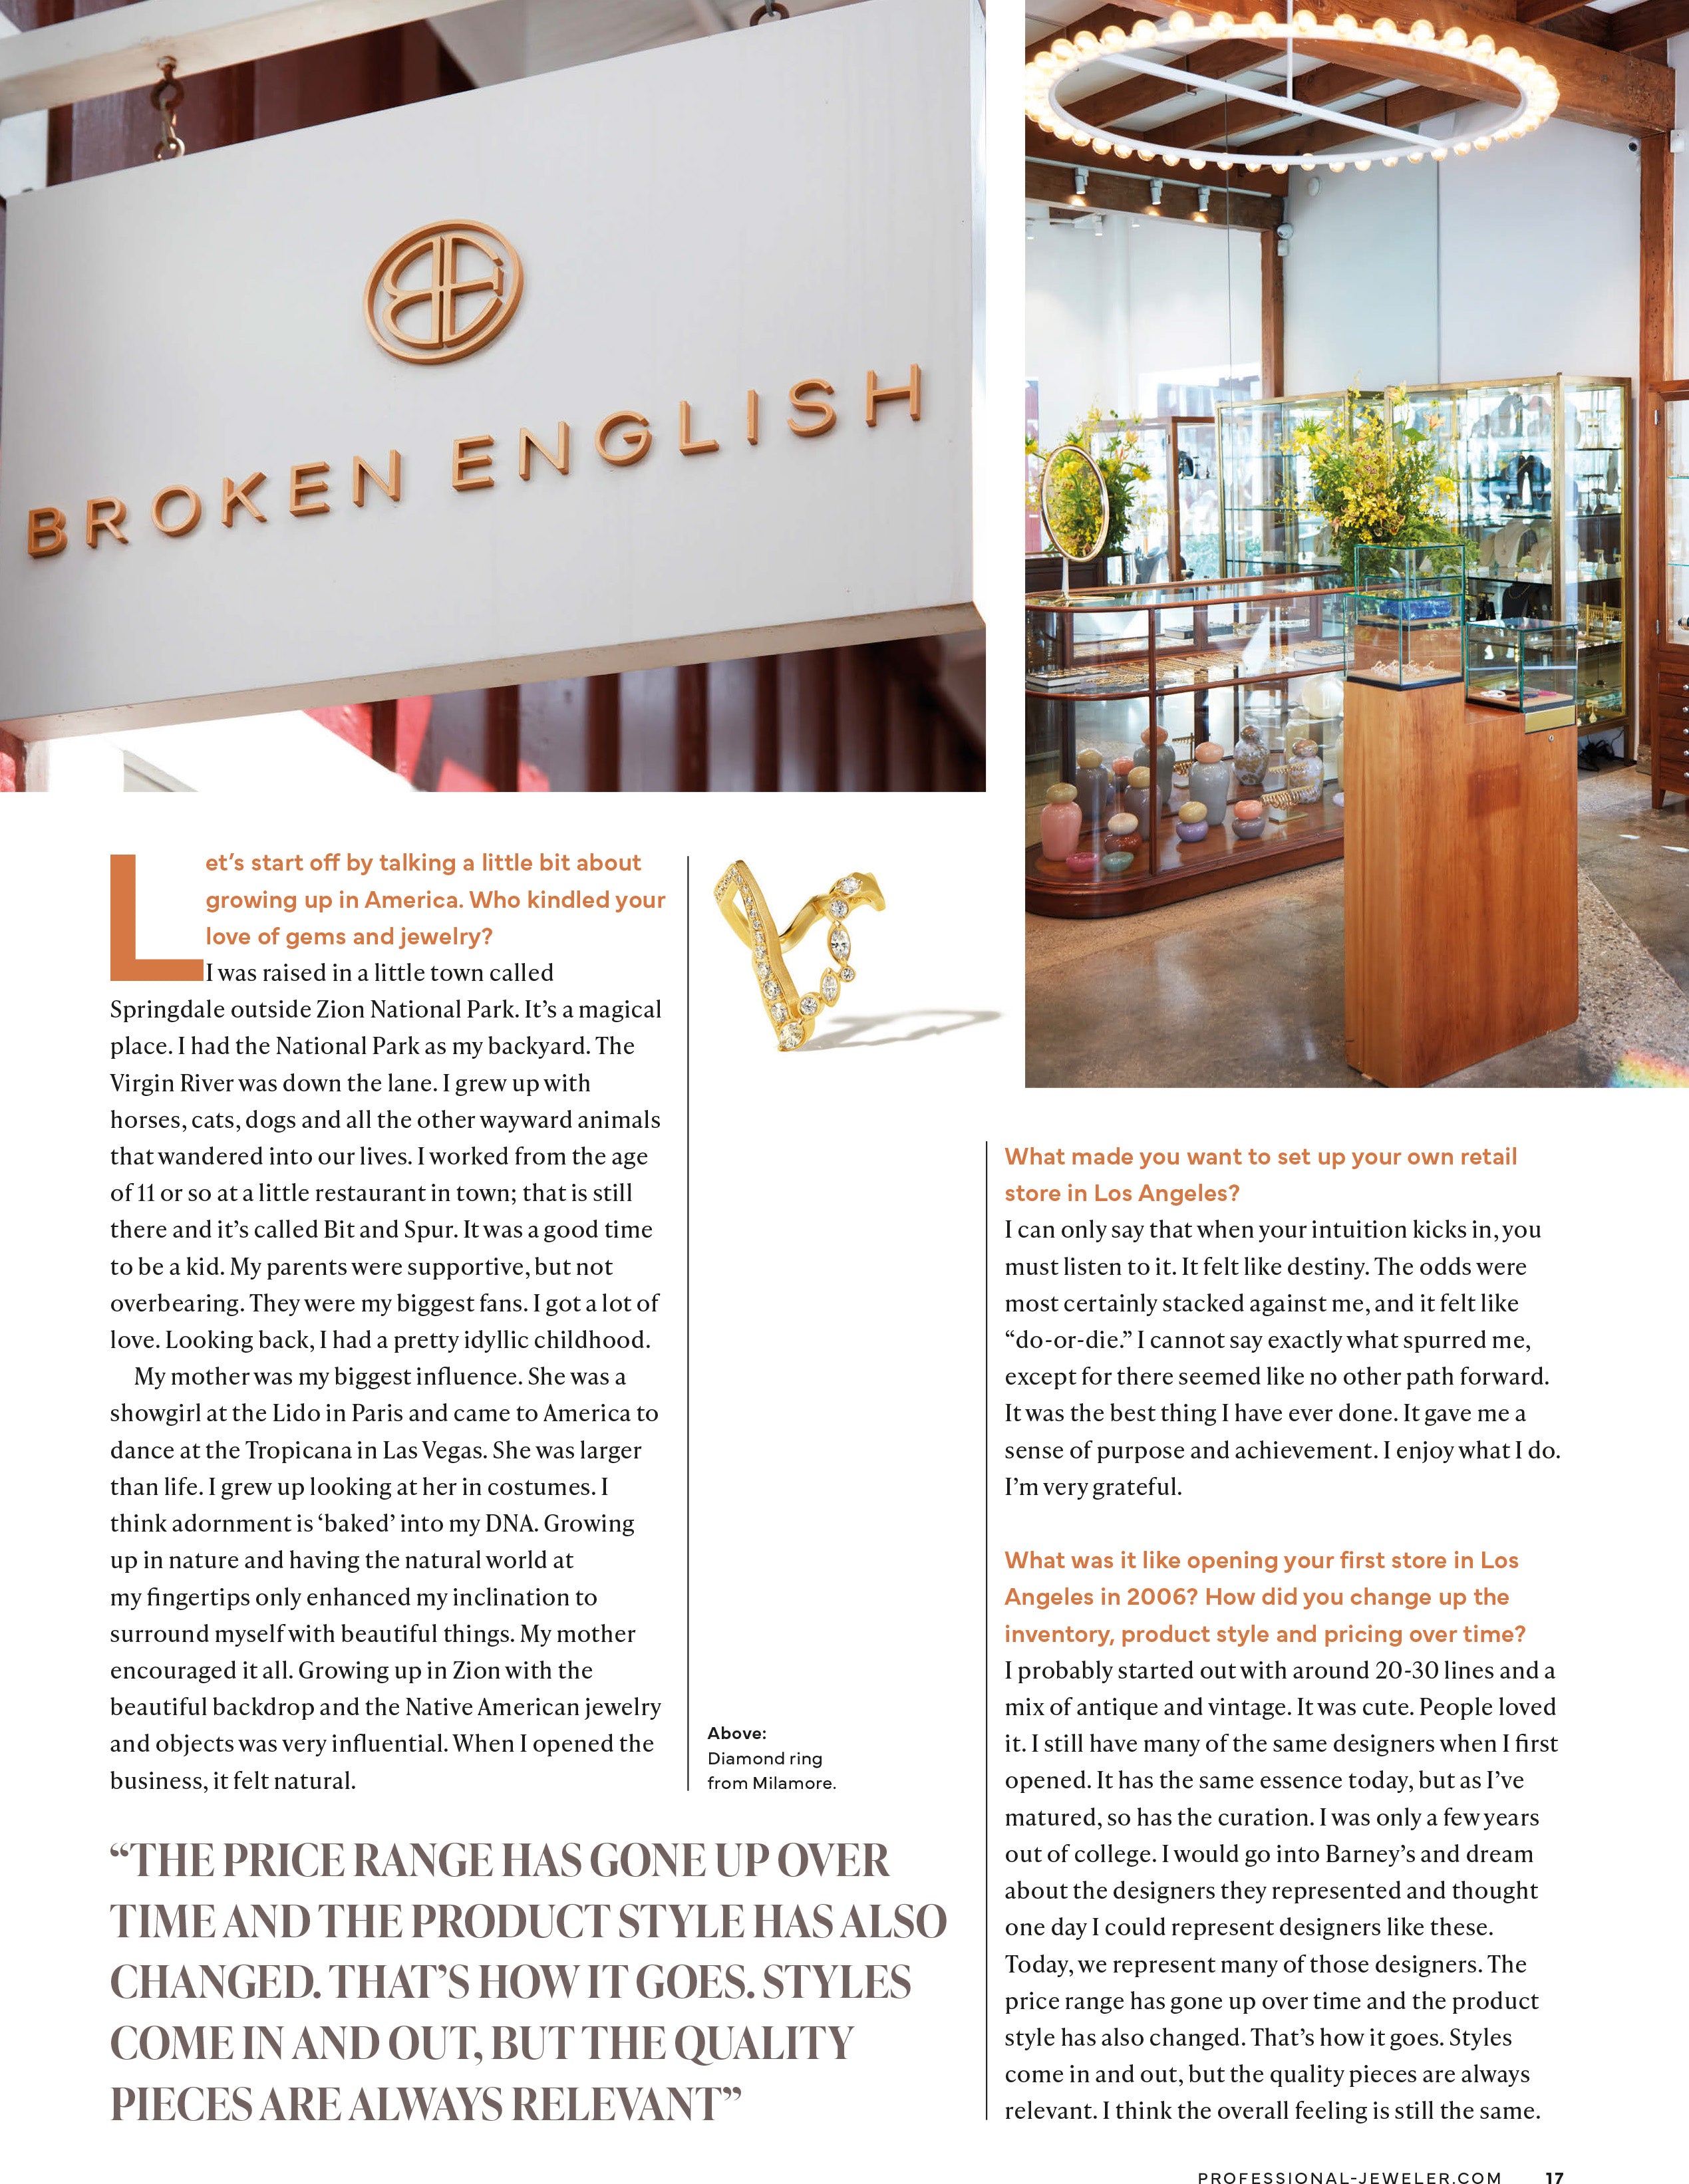 Broken English Jewelry featured in the September 2023 issue of Professional Jeweler, Speaking the Language of Jewelry